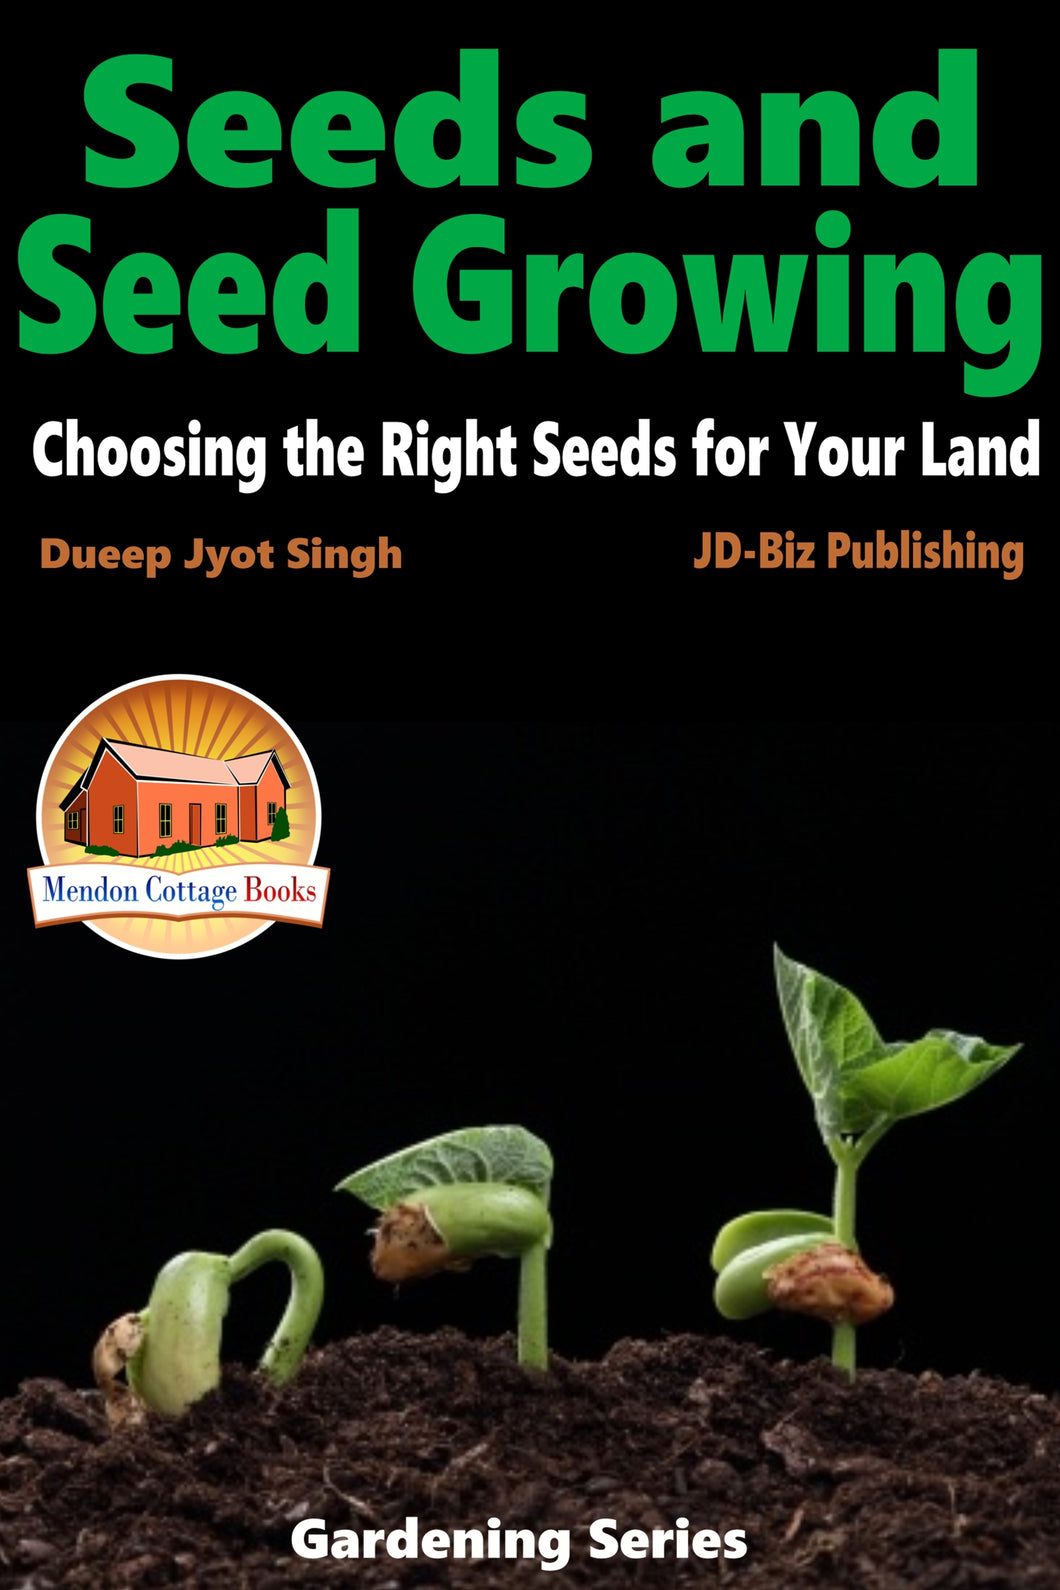 Seeds and Seed Growing - Choosing the Right Seeds for Your Land